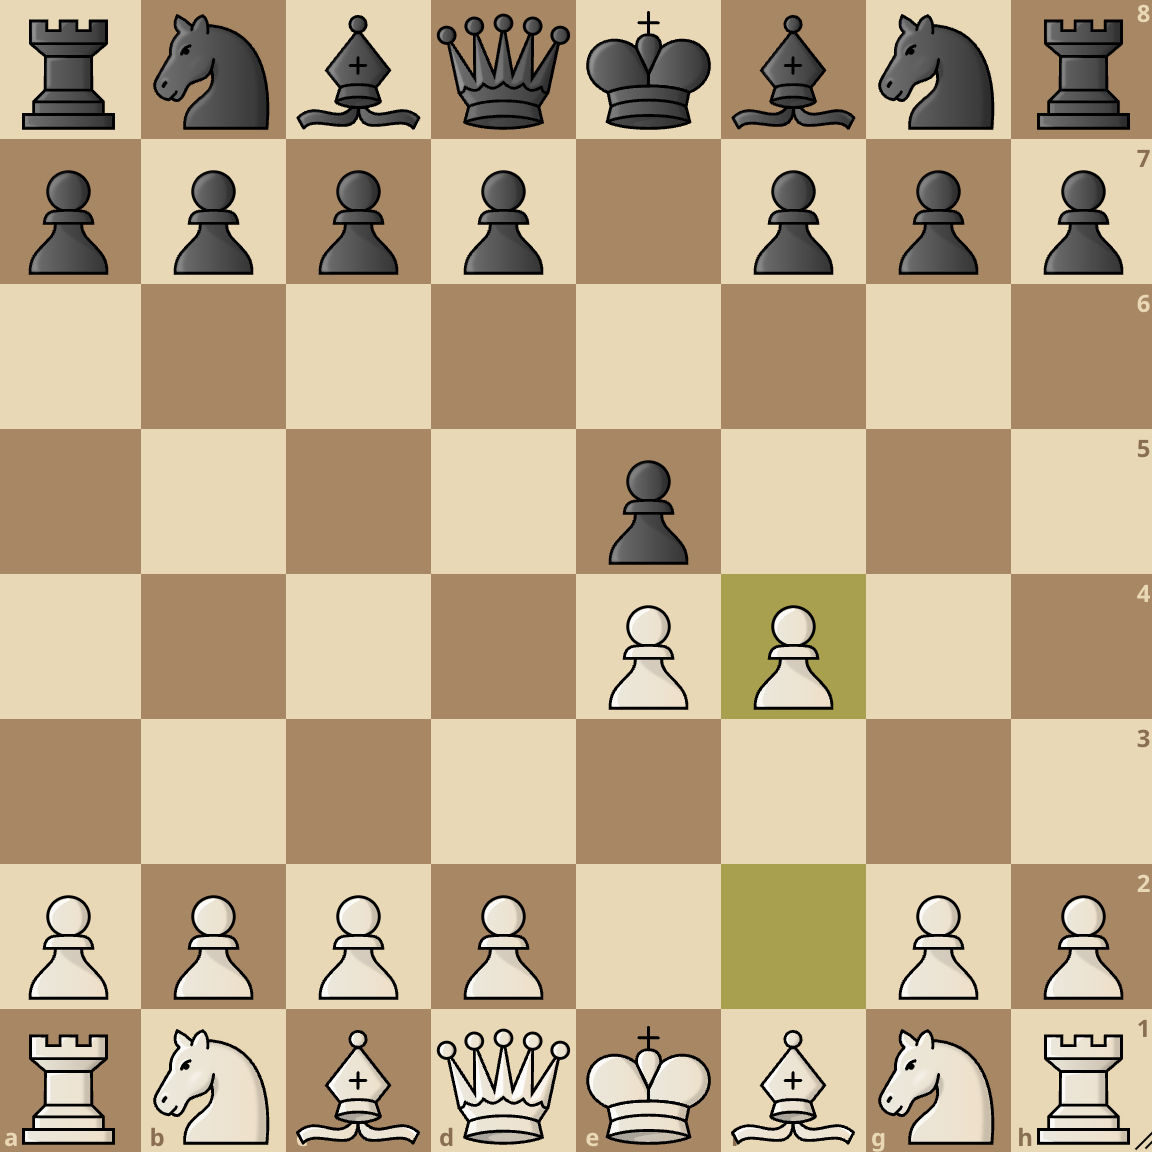 The King's Gambit 